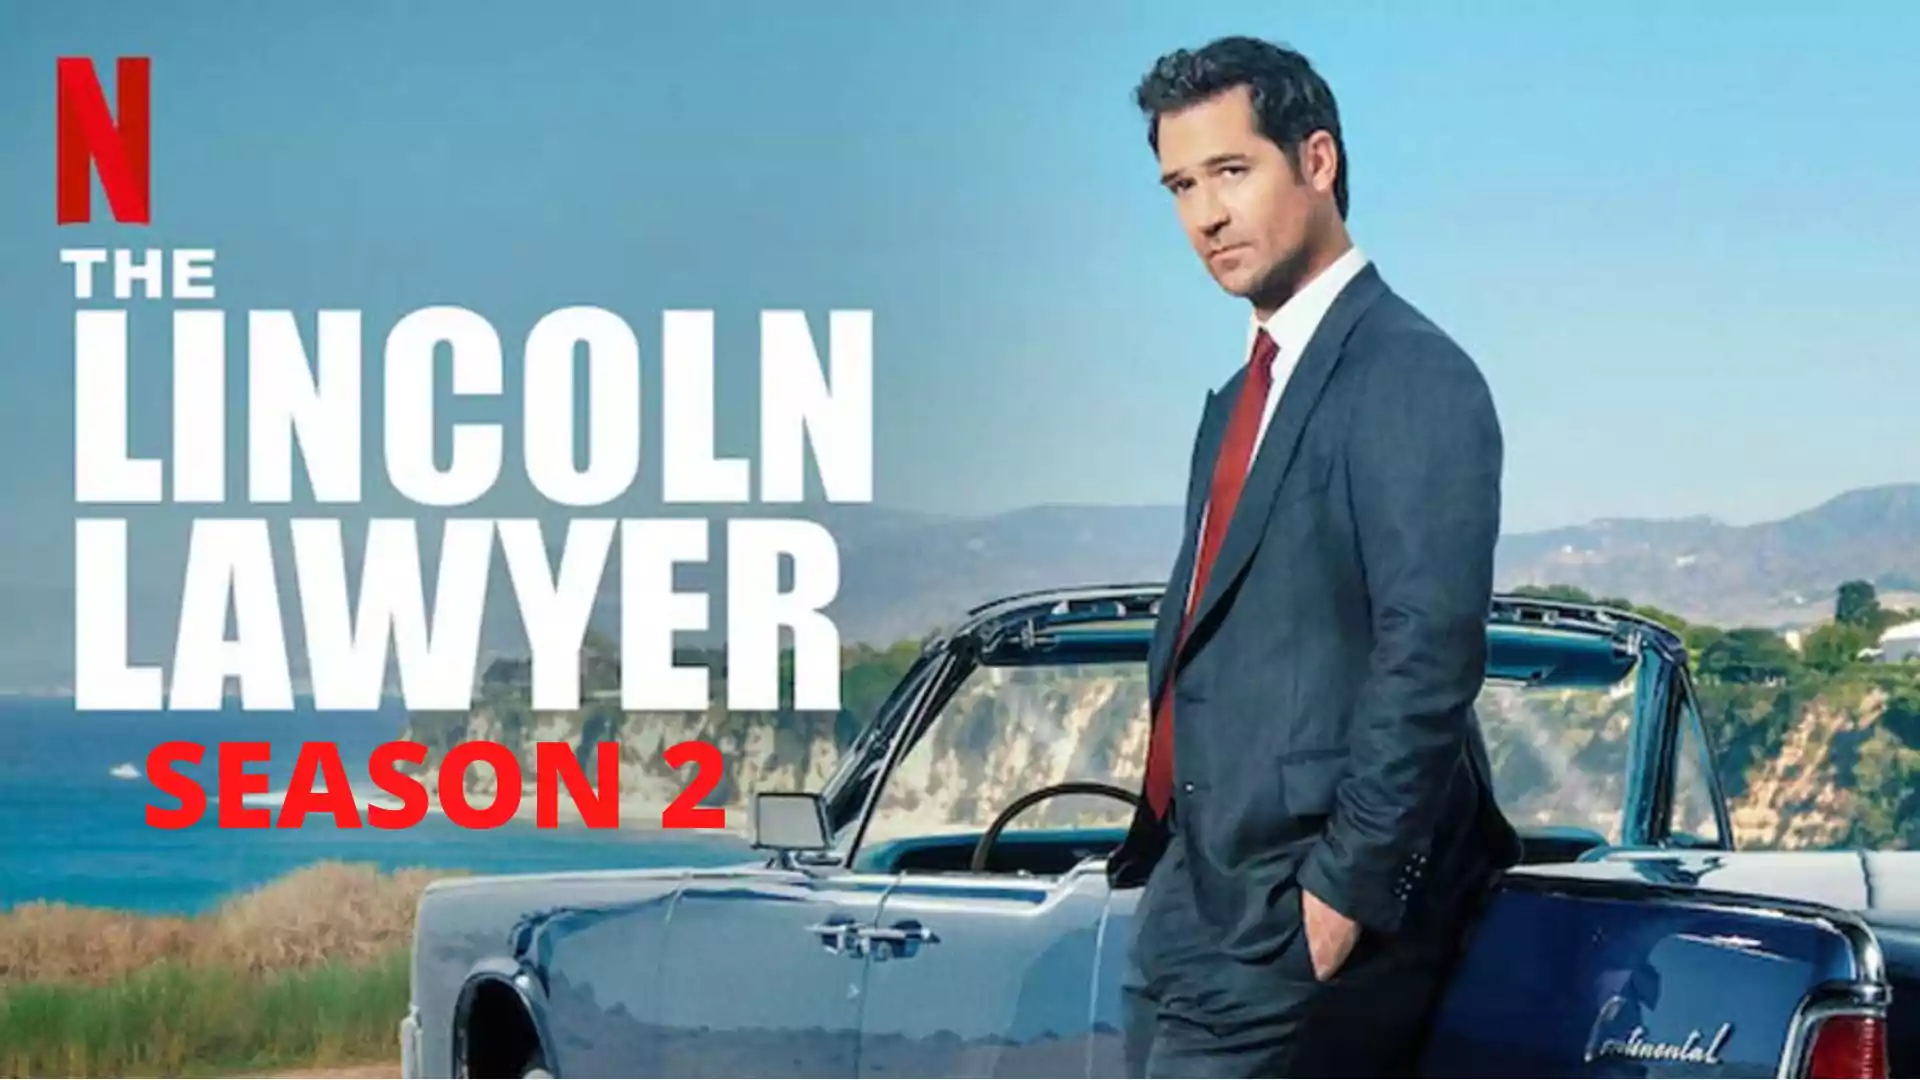 The Lincoln Lawyer Renewed for Season 2